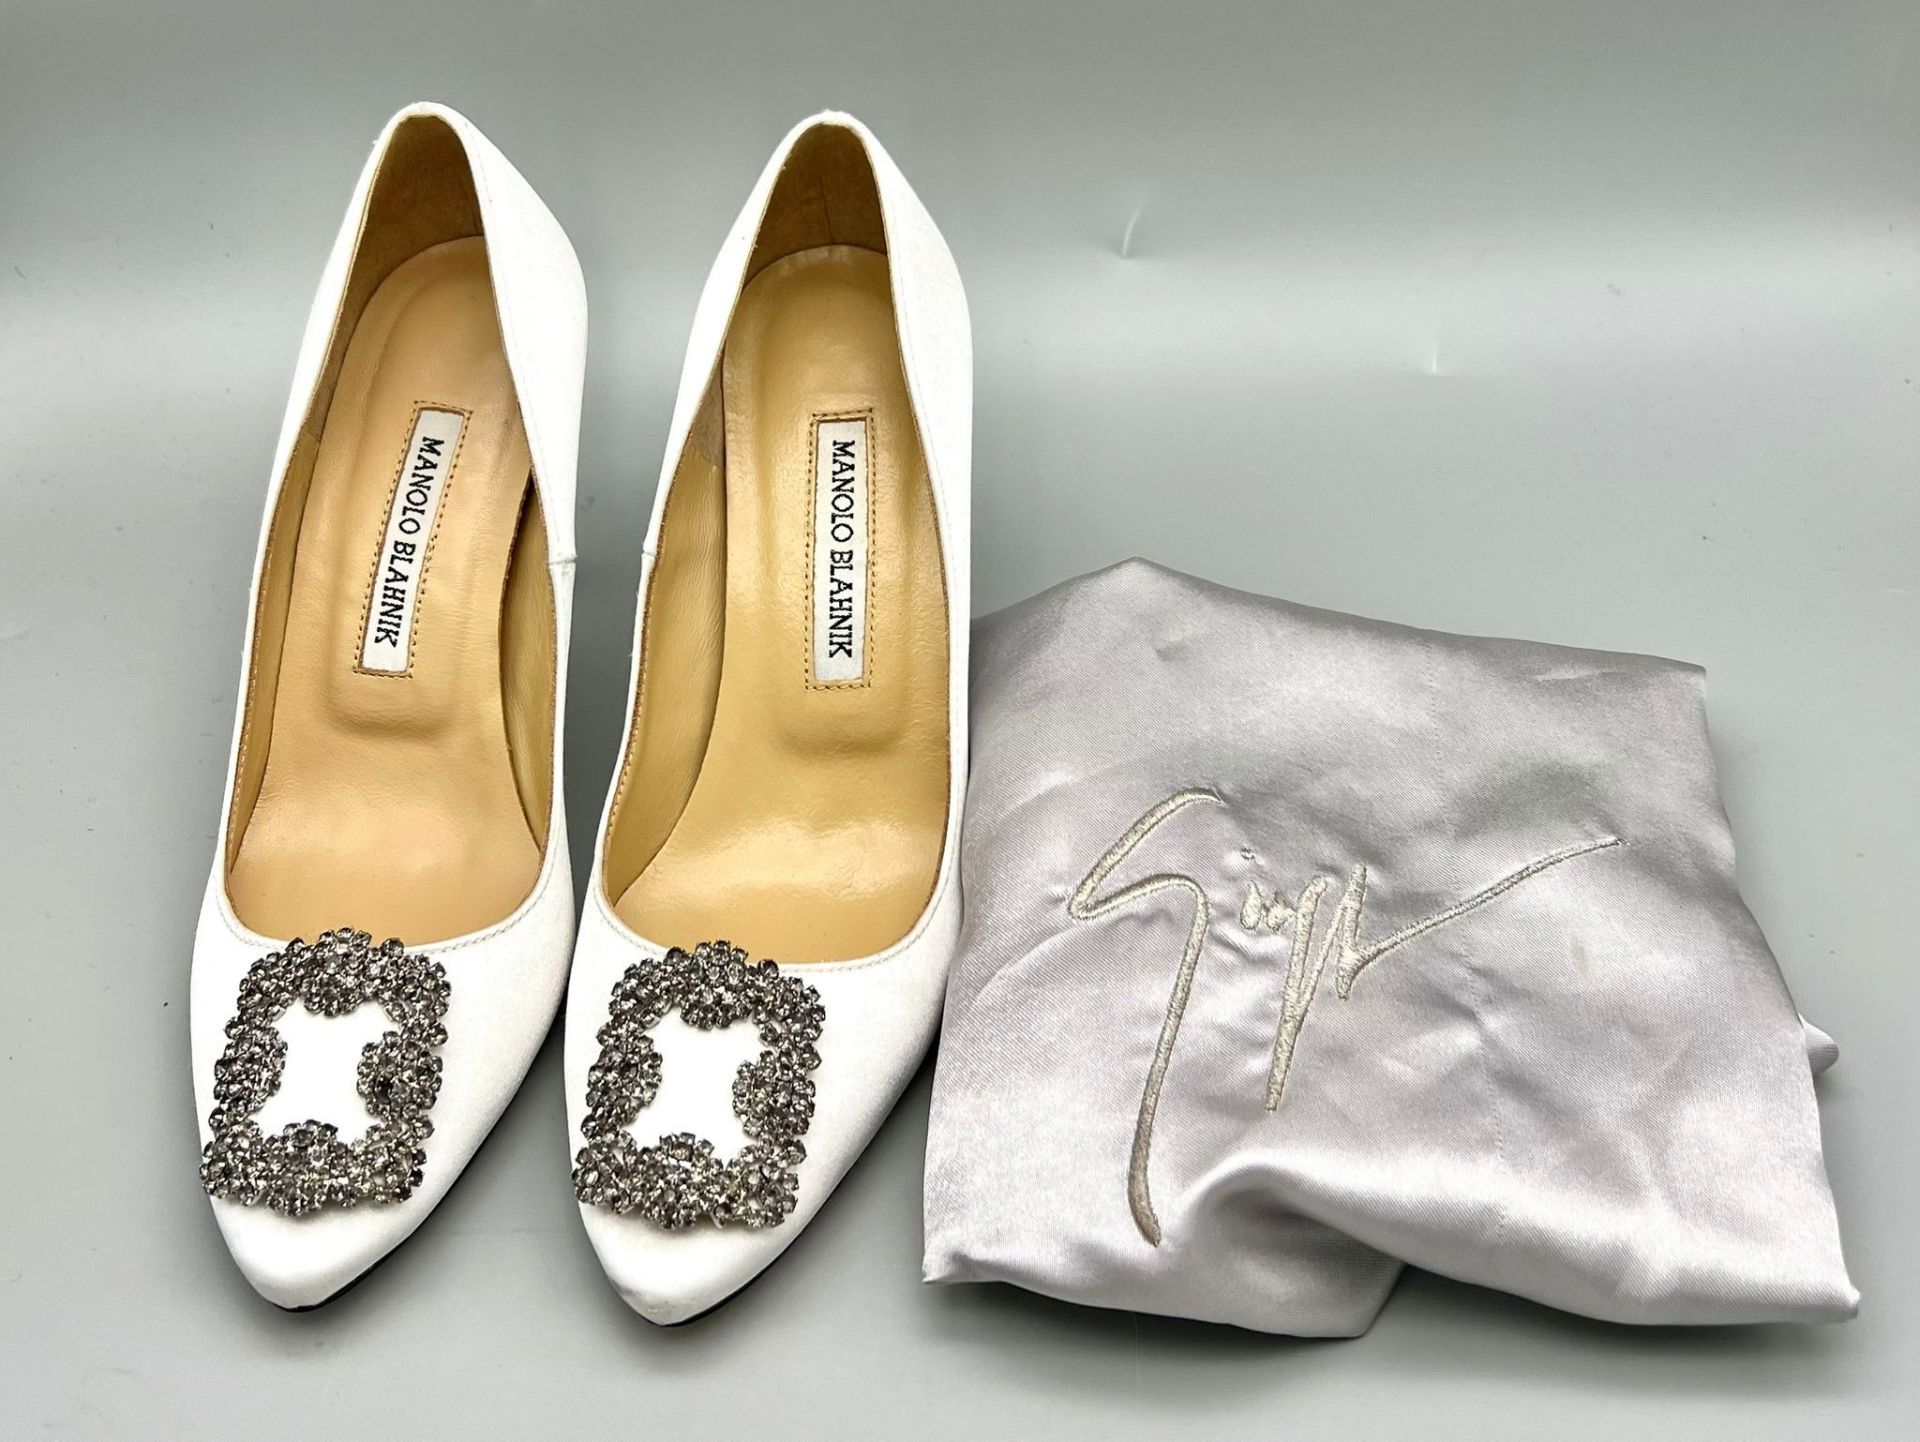 A Pair of Hand-Made Italian Manolo Blahnik White Ladies Shoes with White Stone Decoration. Good